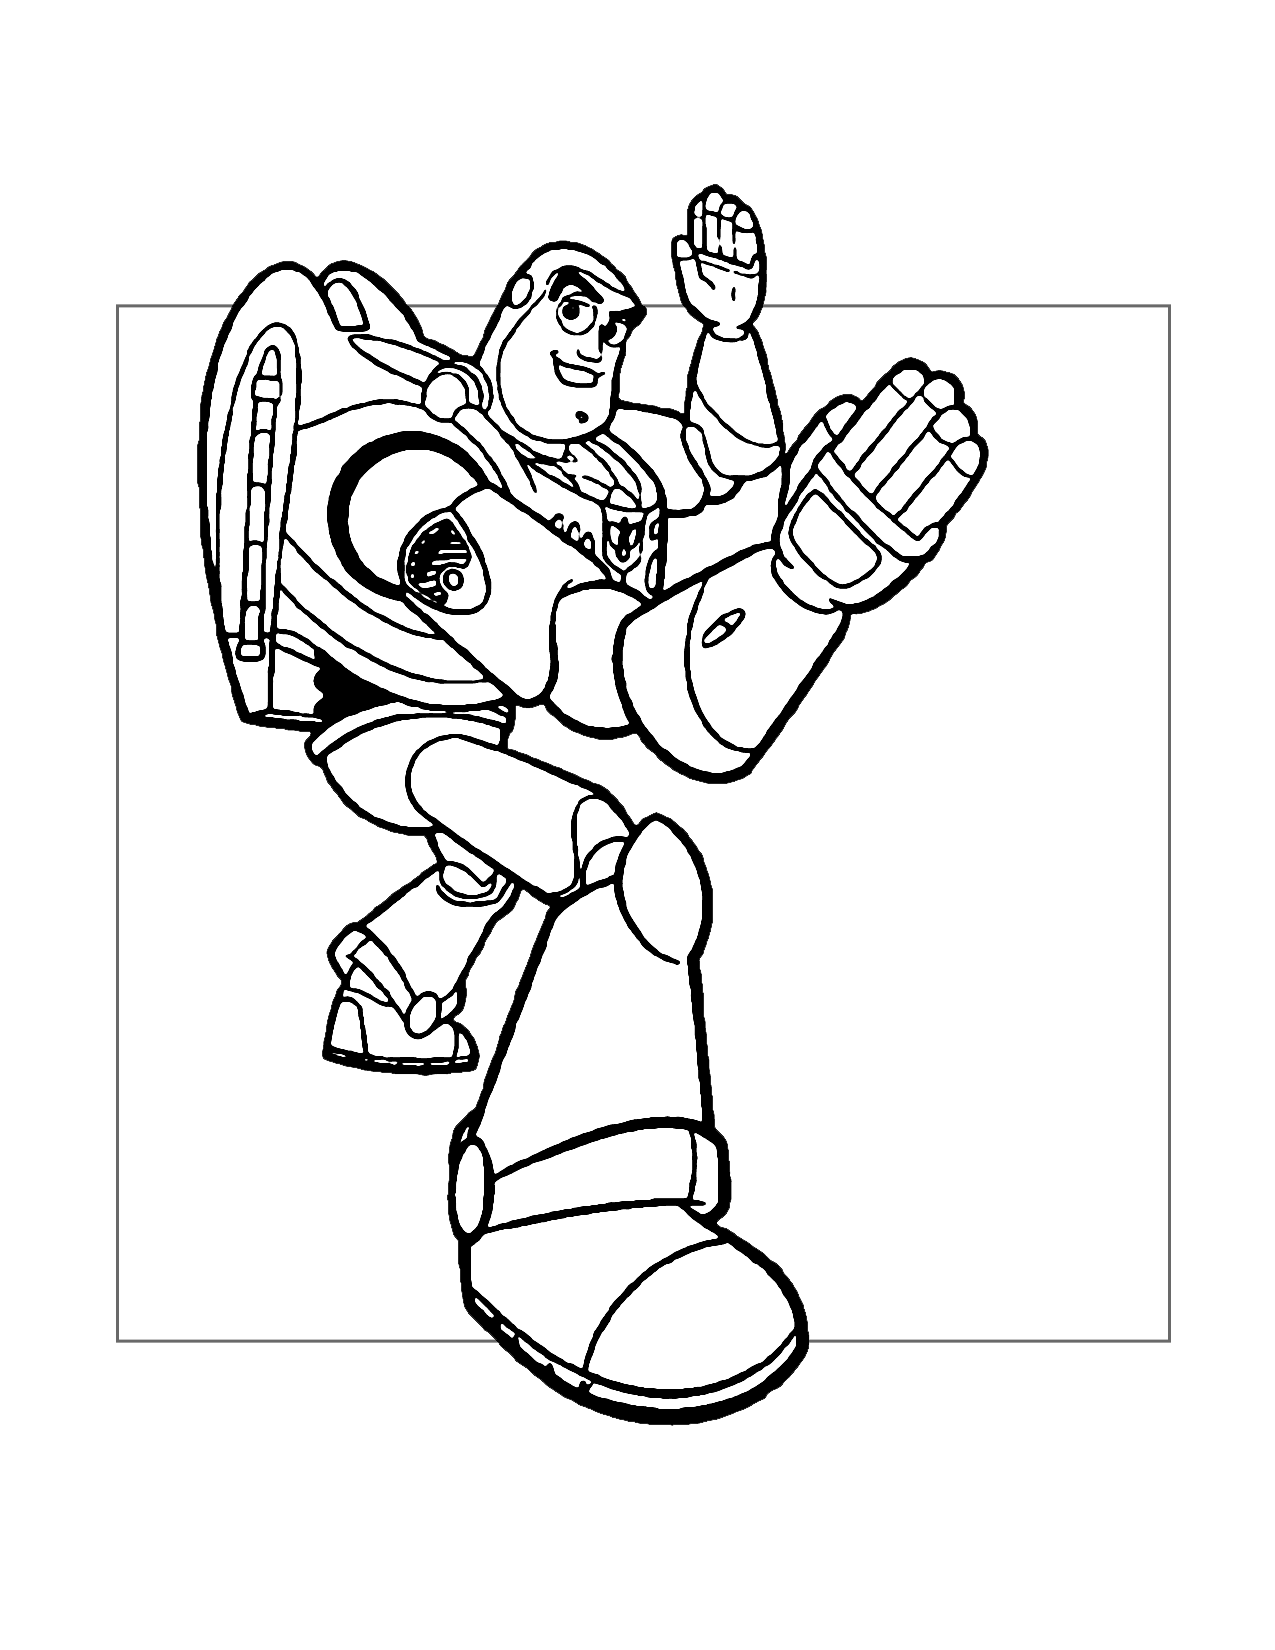 Buzz Lightyear Karate Coloring Page